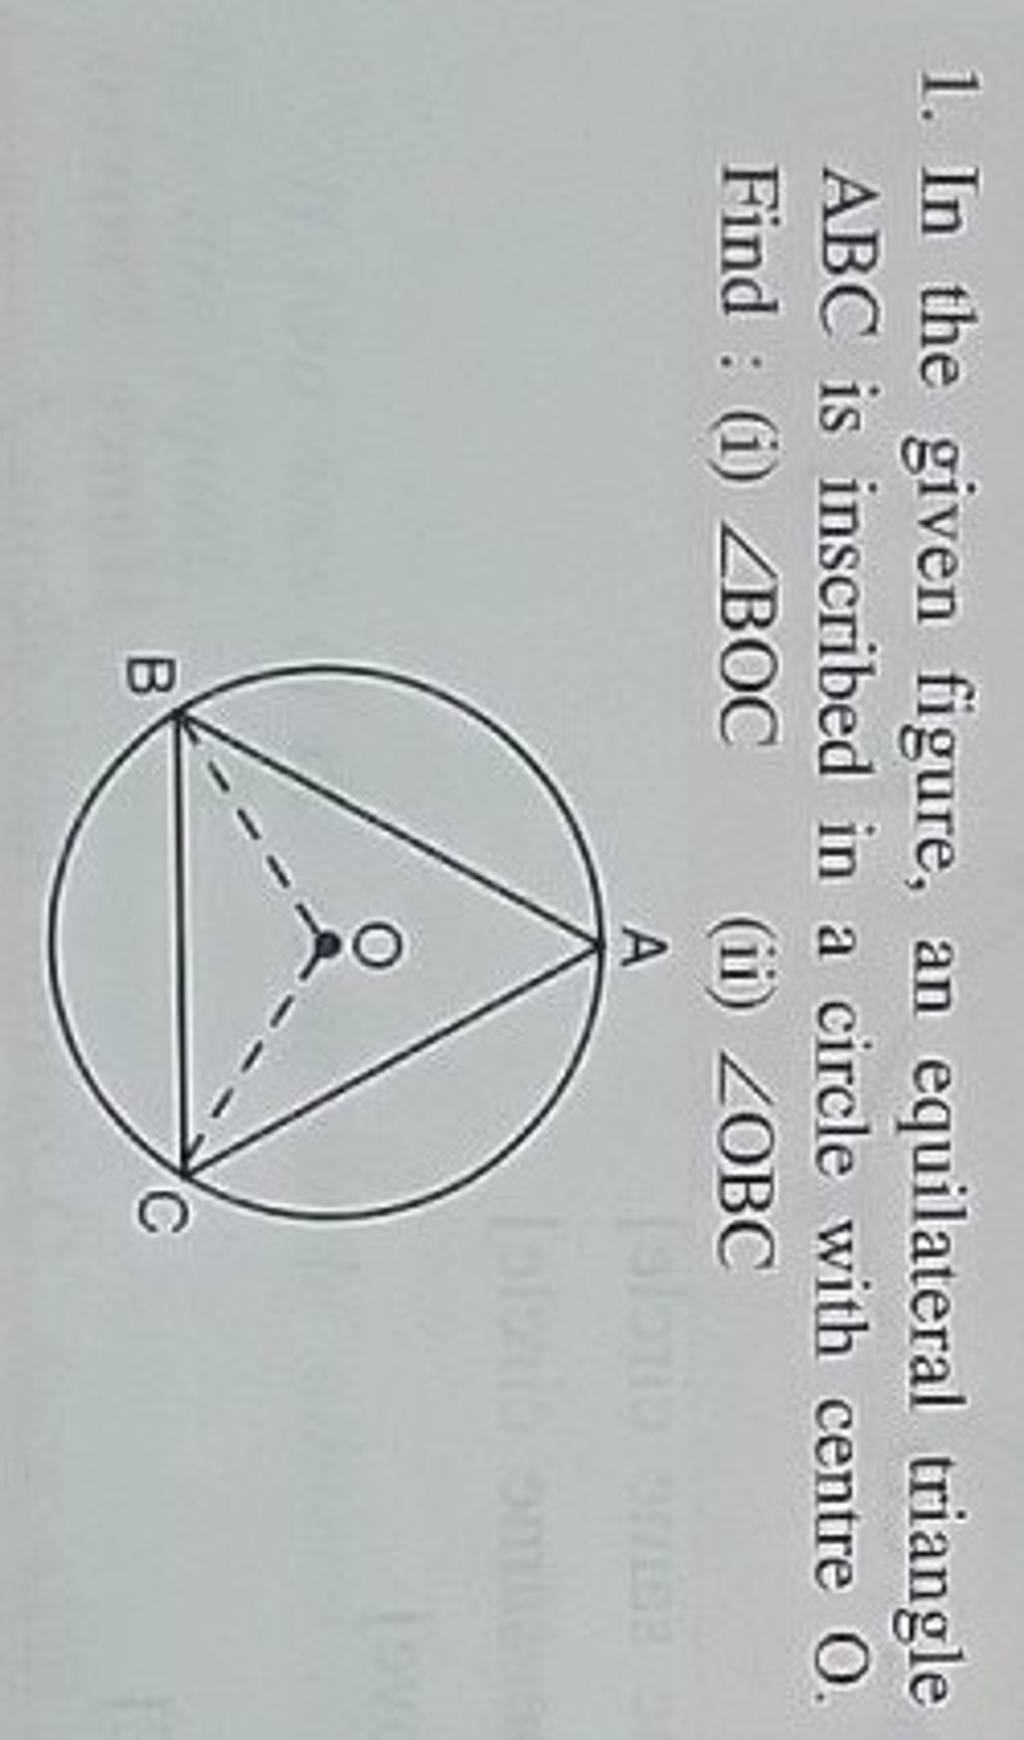 1. In the given figure, an equilateral triangle ABC is inscribed in a 